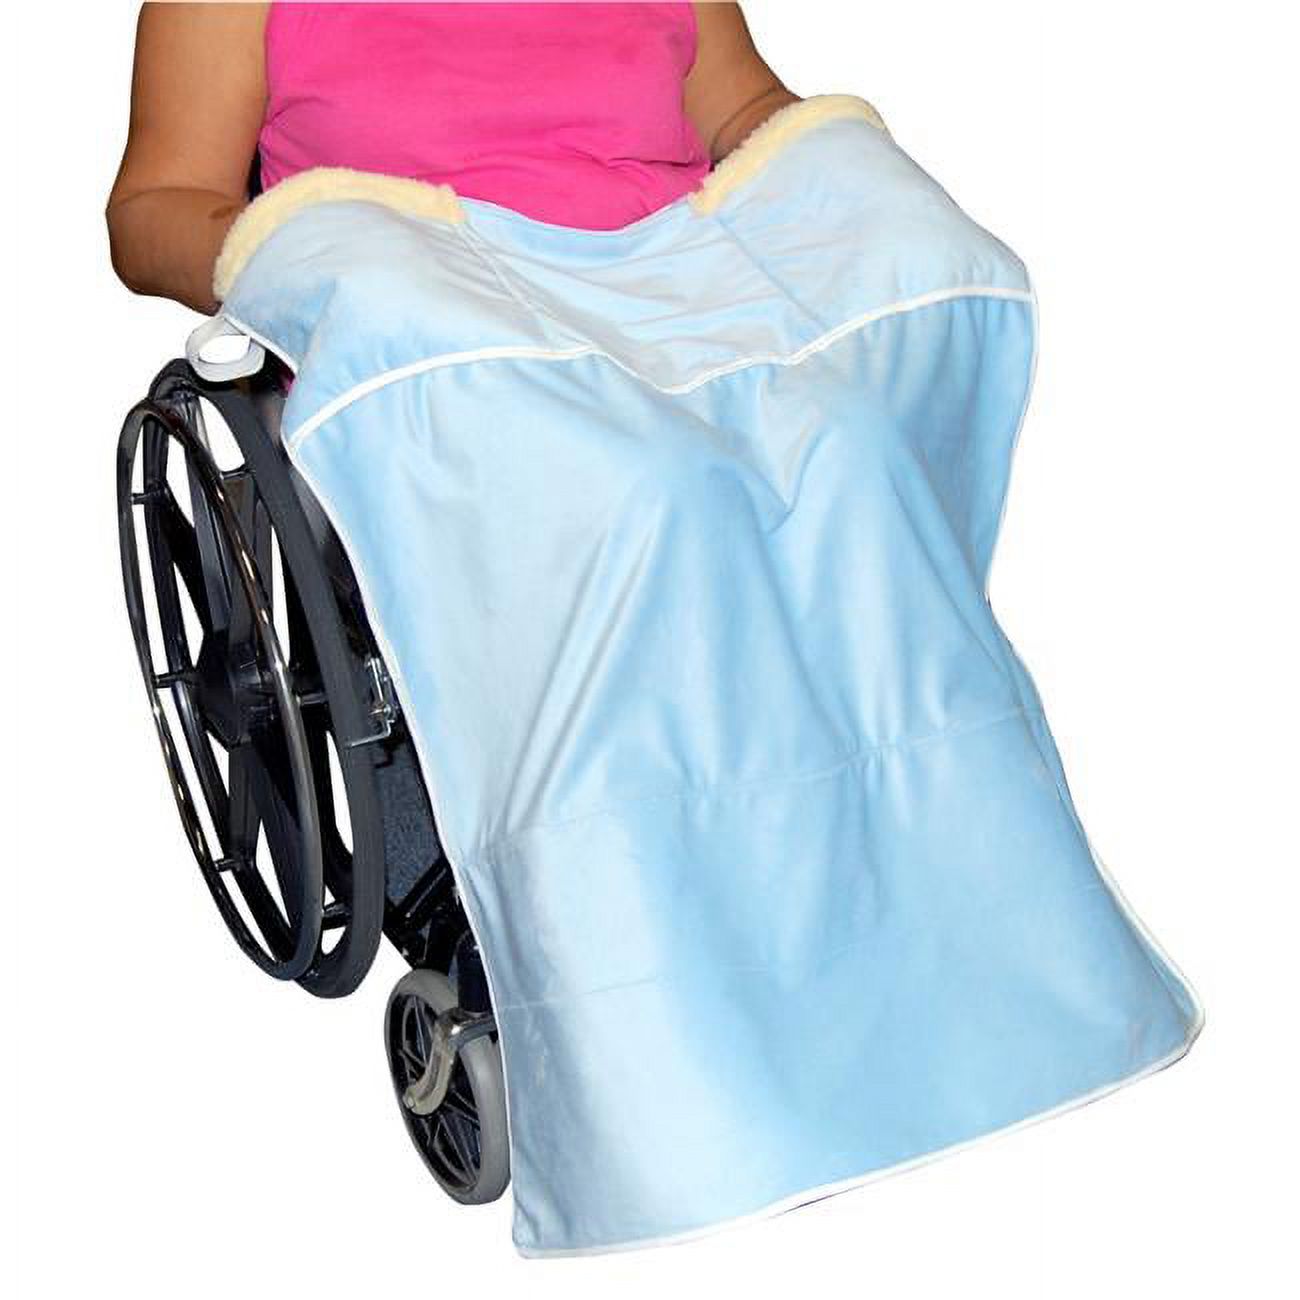 Skil-Care 914761 Lap Blanket with Hand Warmer - Universal - image 1 of 3